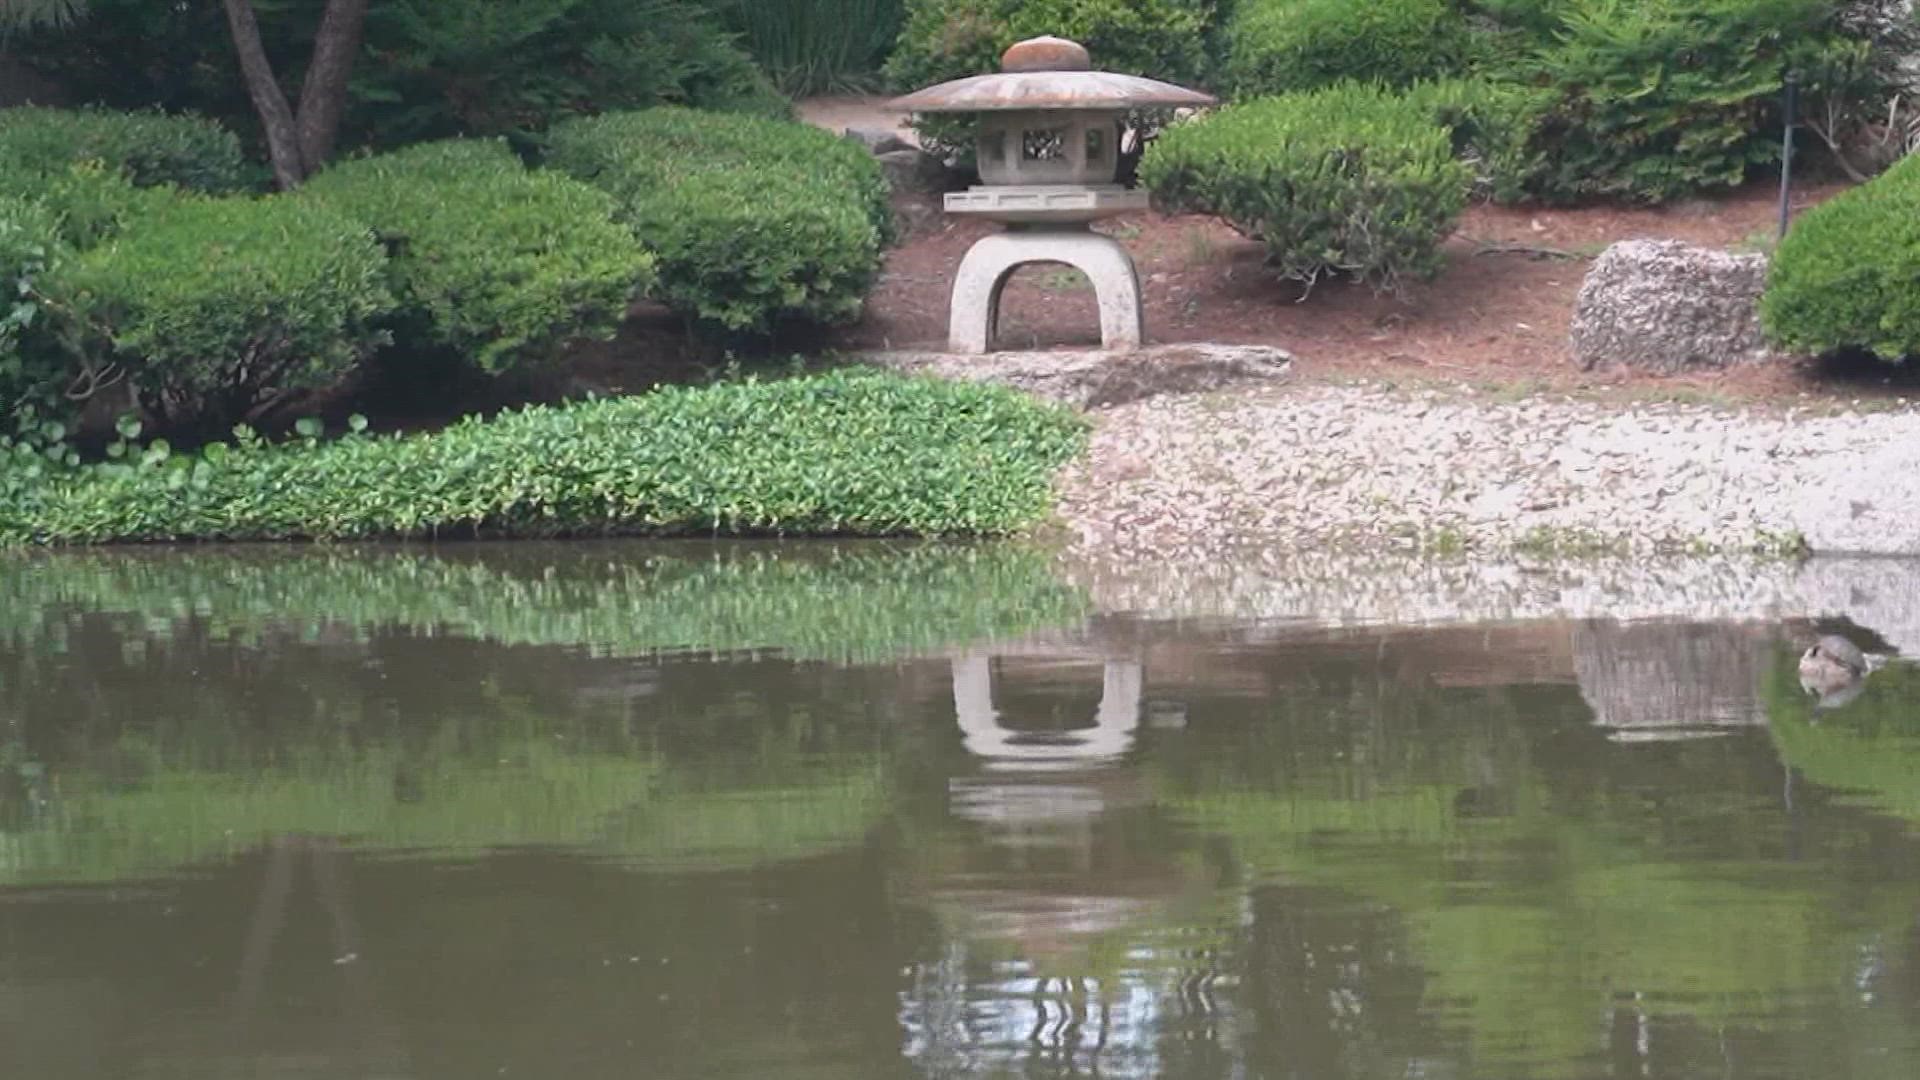 Not far from the busy Texas Medical Center and just a few miles from the hustle and bustle of downtown Houston, lies the beautiful, tranquil Japanese Garden.